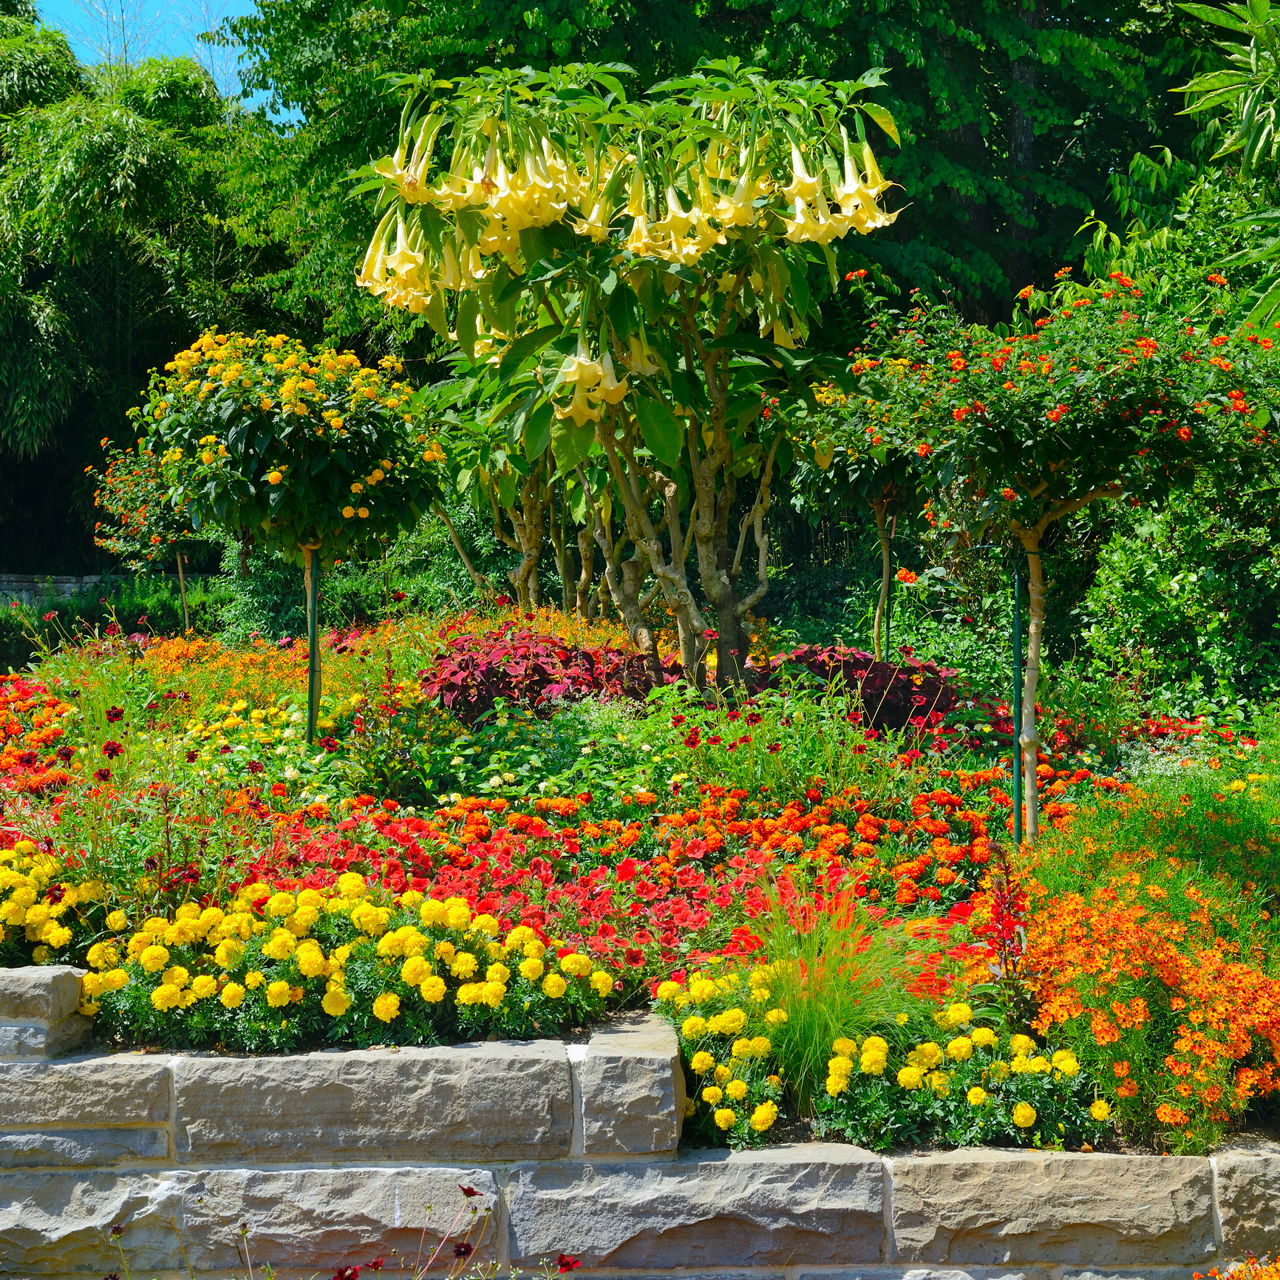 Colorful Flower Bed Border: Attractive Flower Bed Edging ...